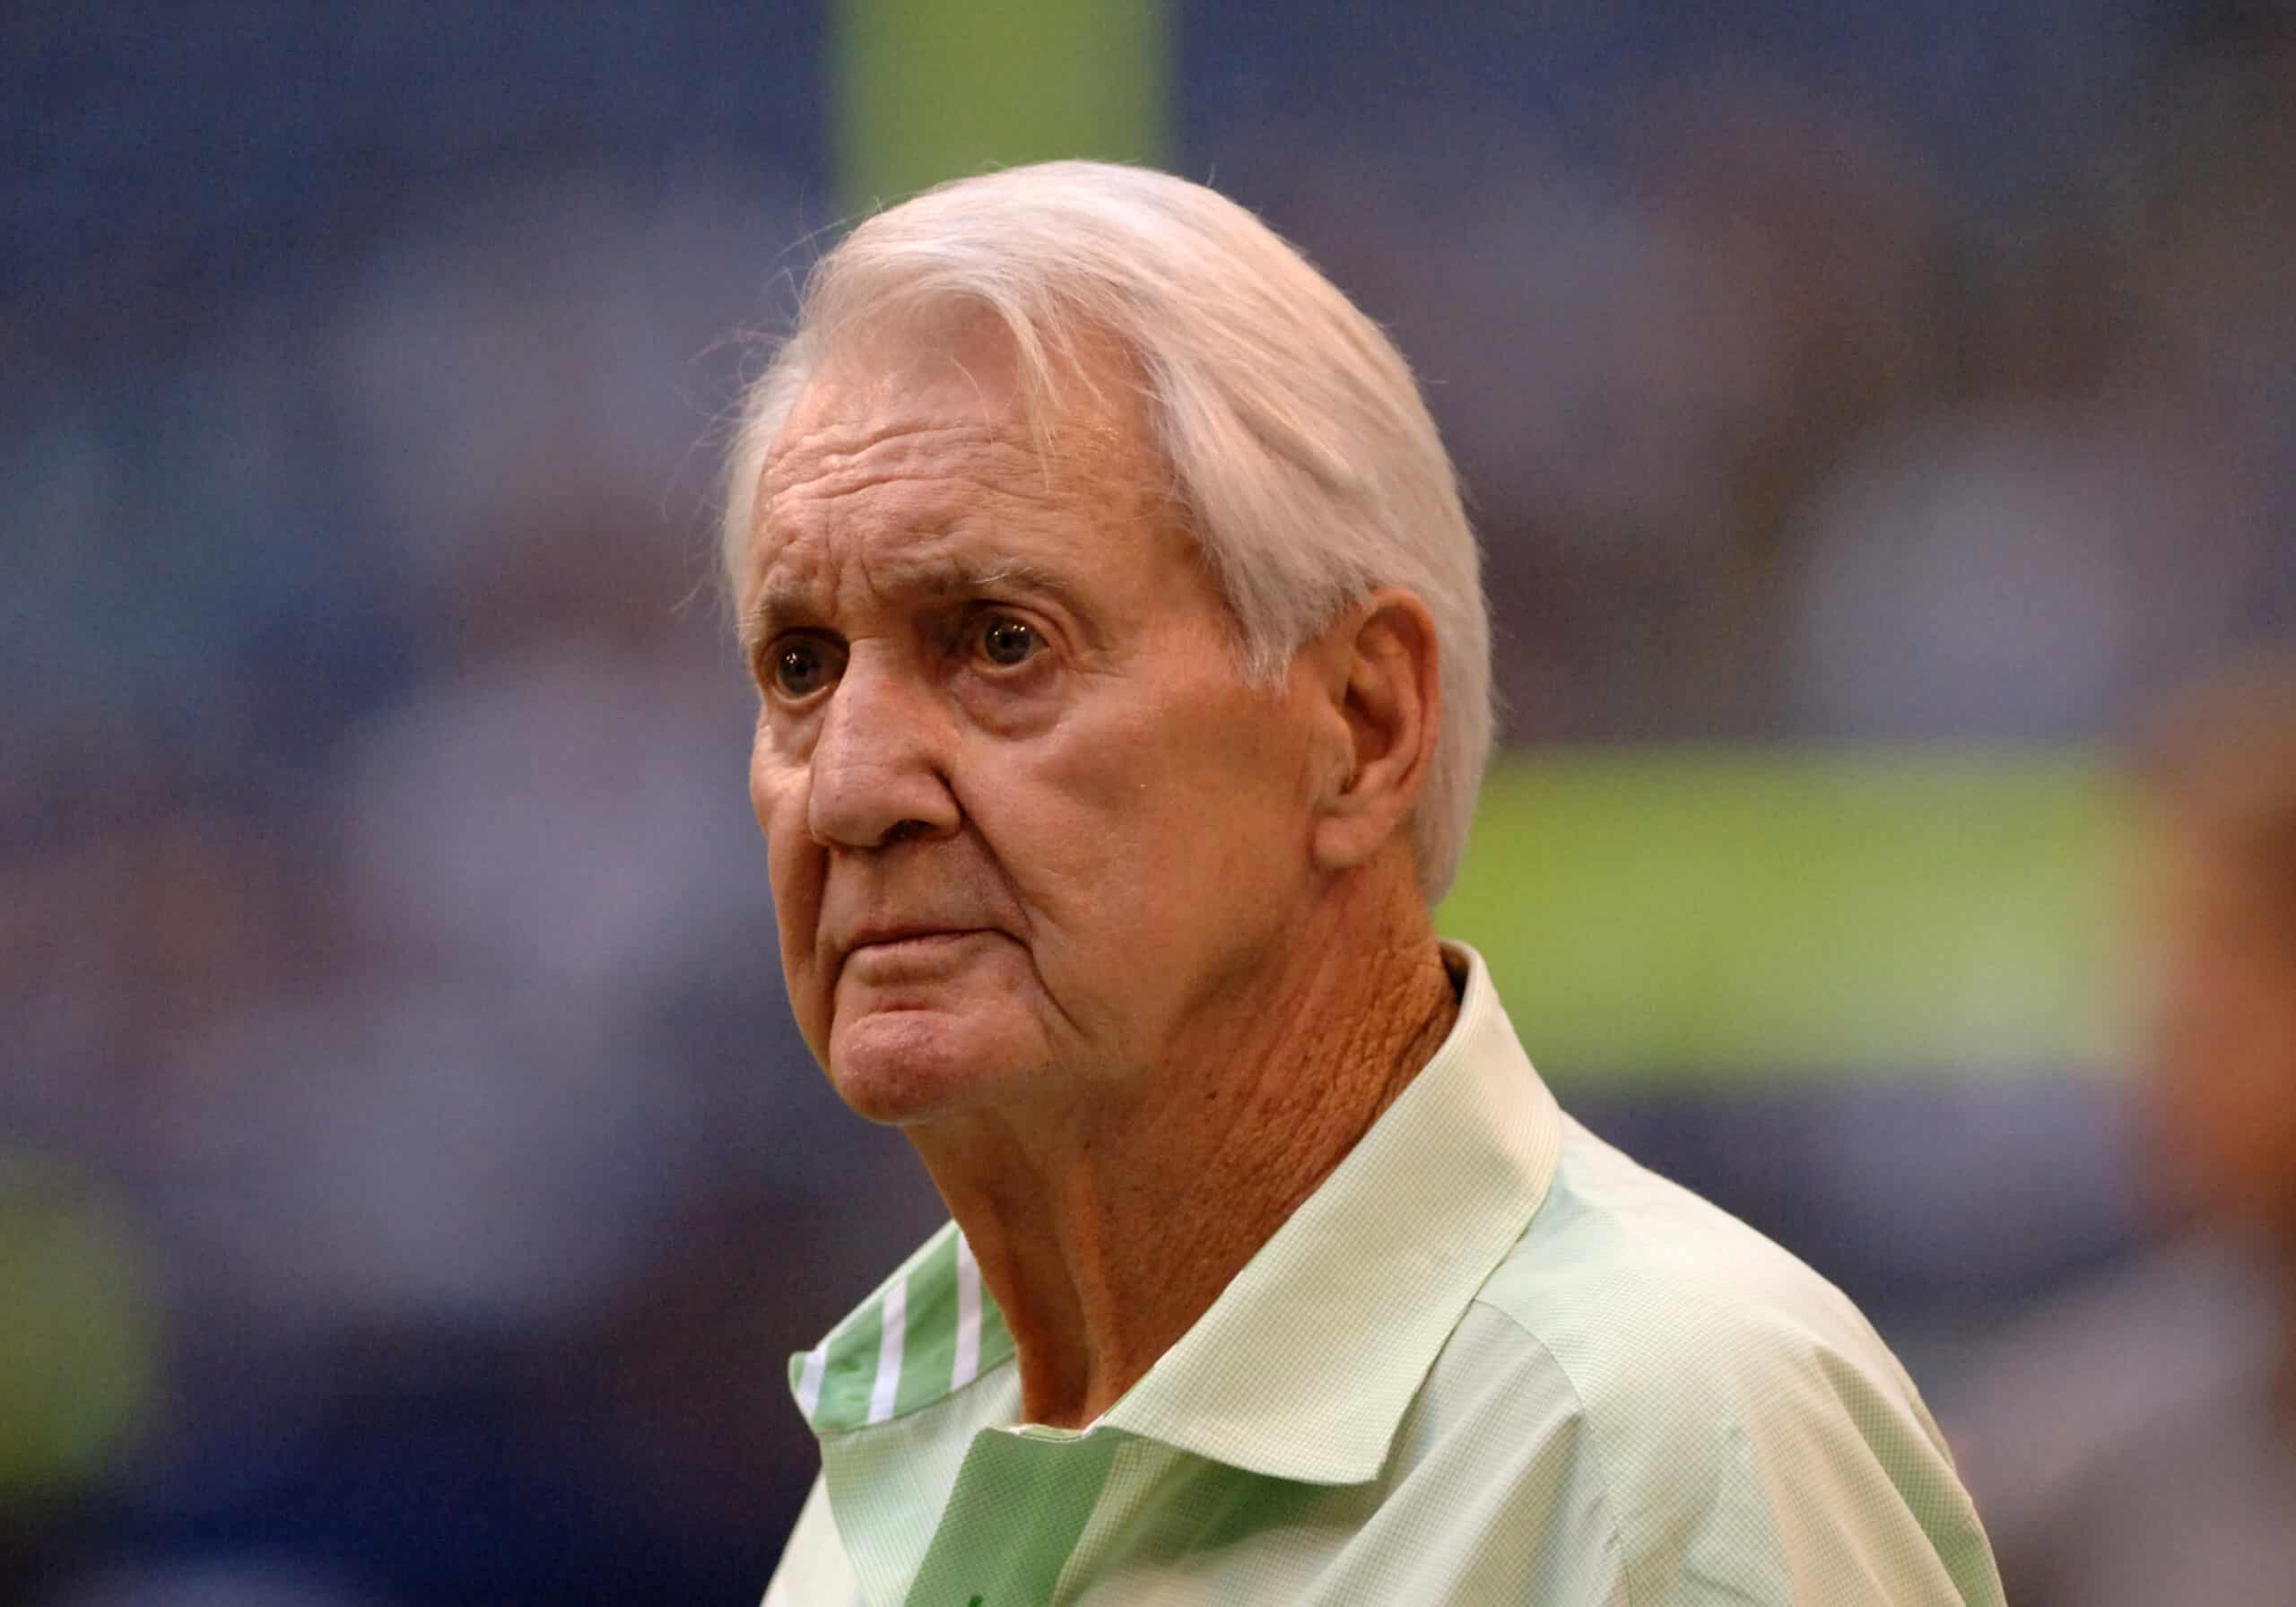 Pat Summerall on the sidelines